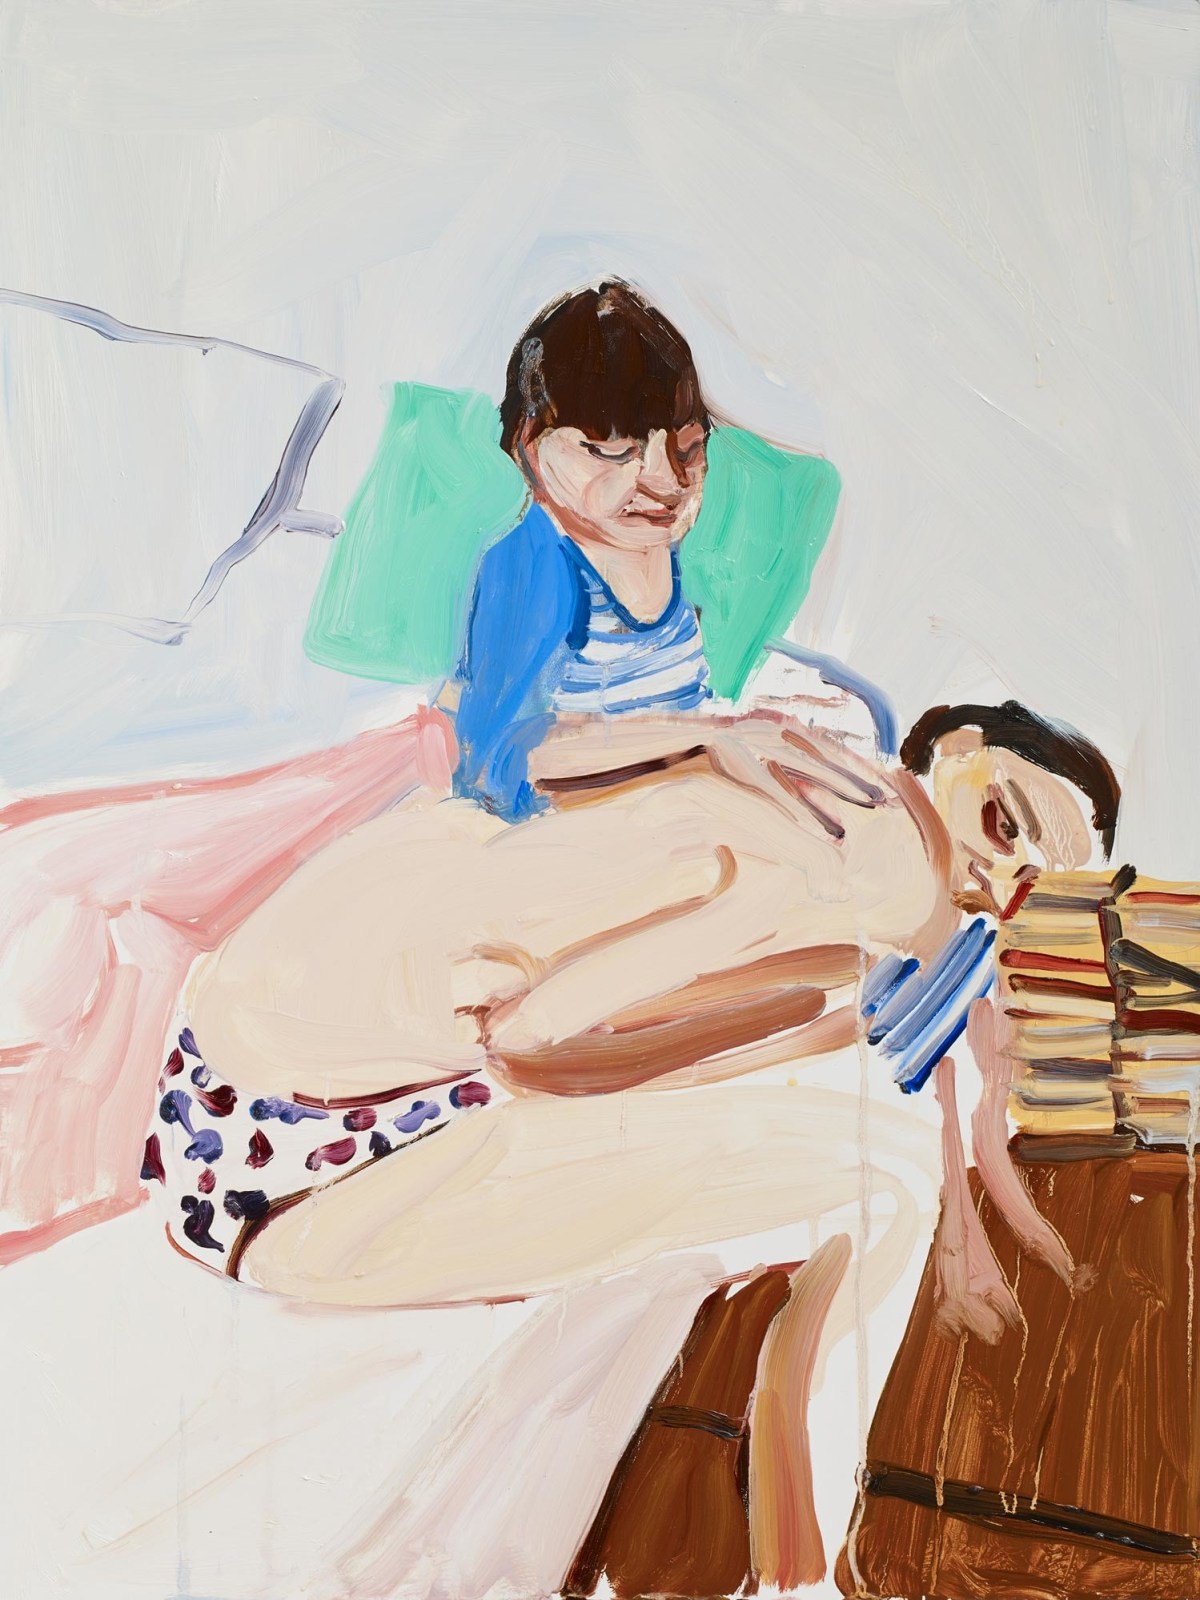 CHANTAL JOFFE, The Squid and the Whale III, 2017